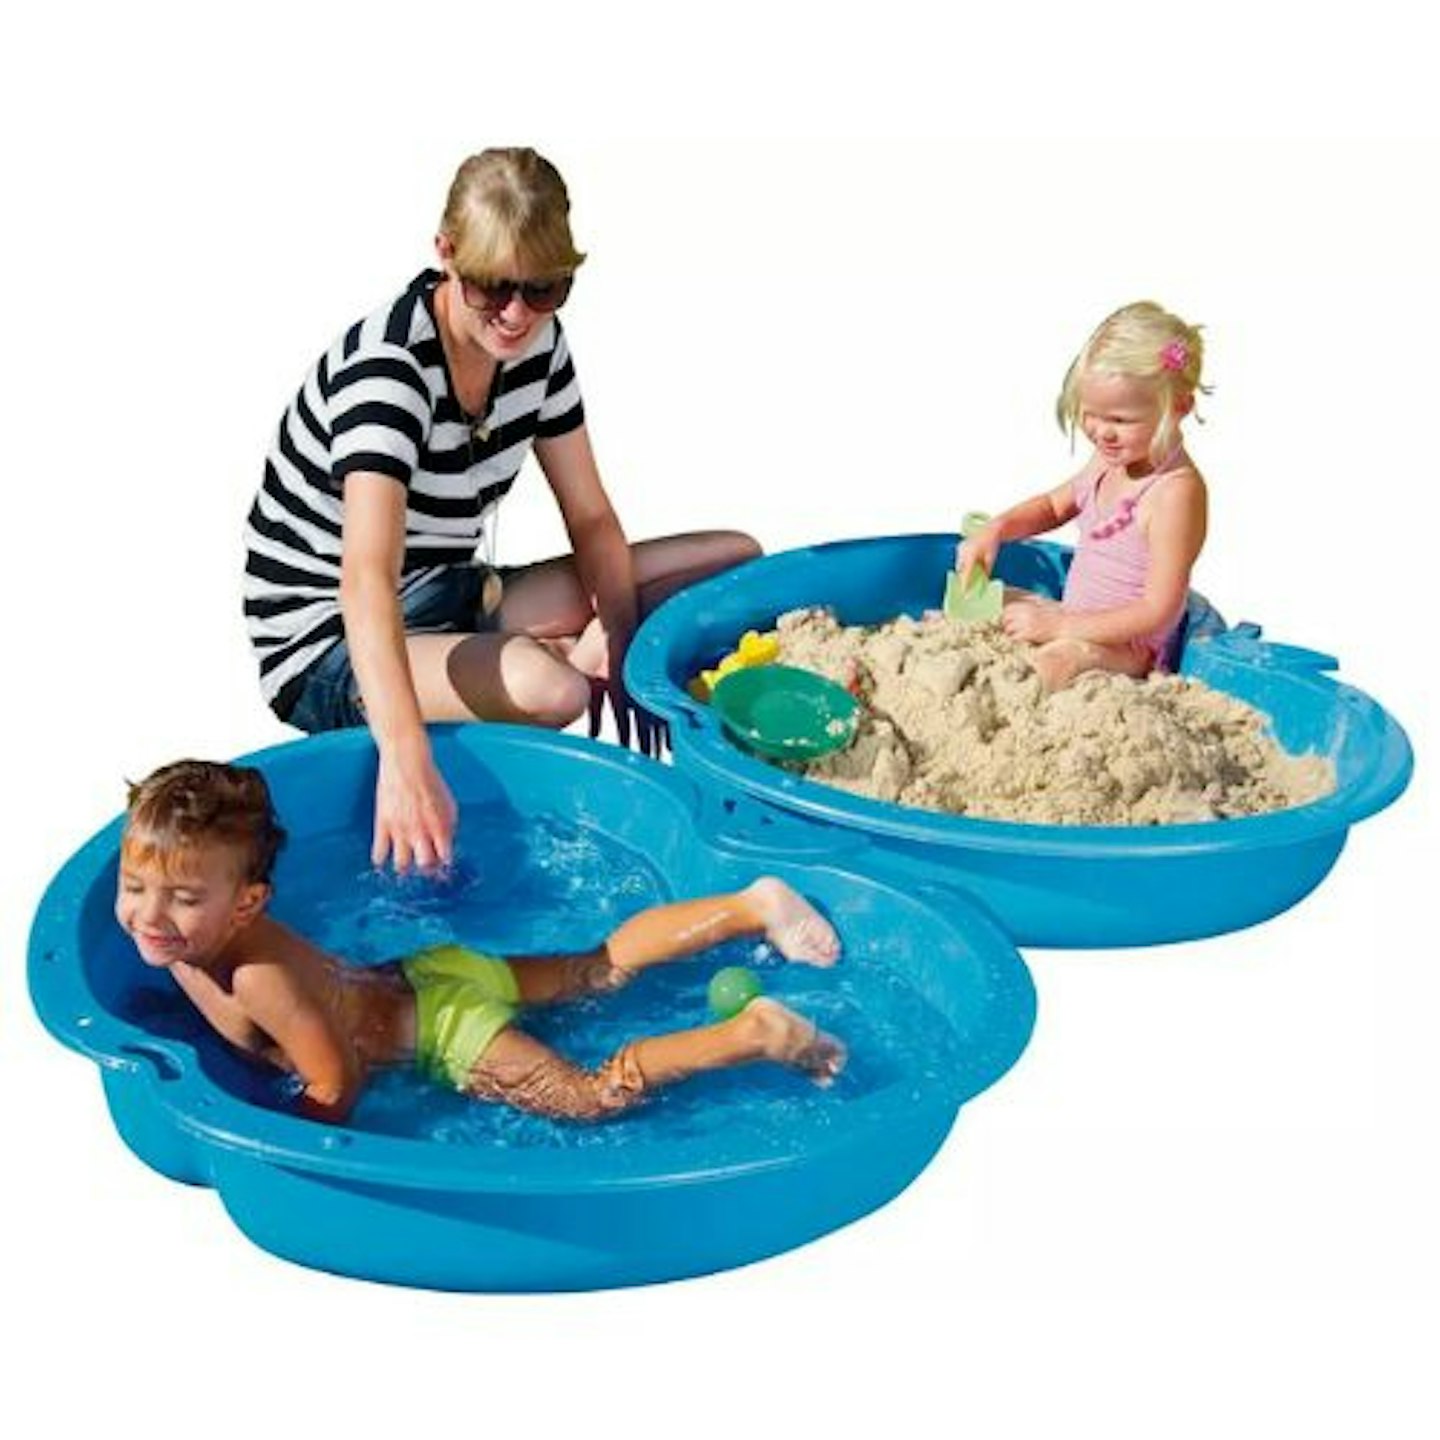 sandpit for babies and toddlers